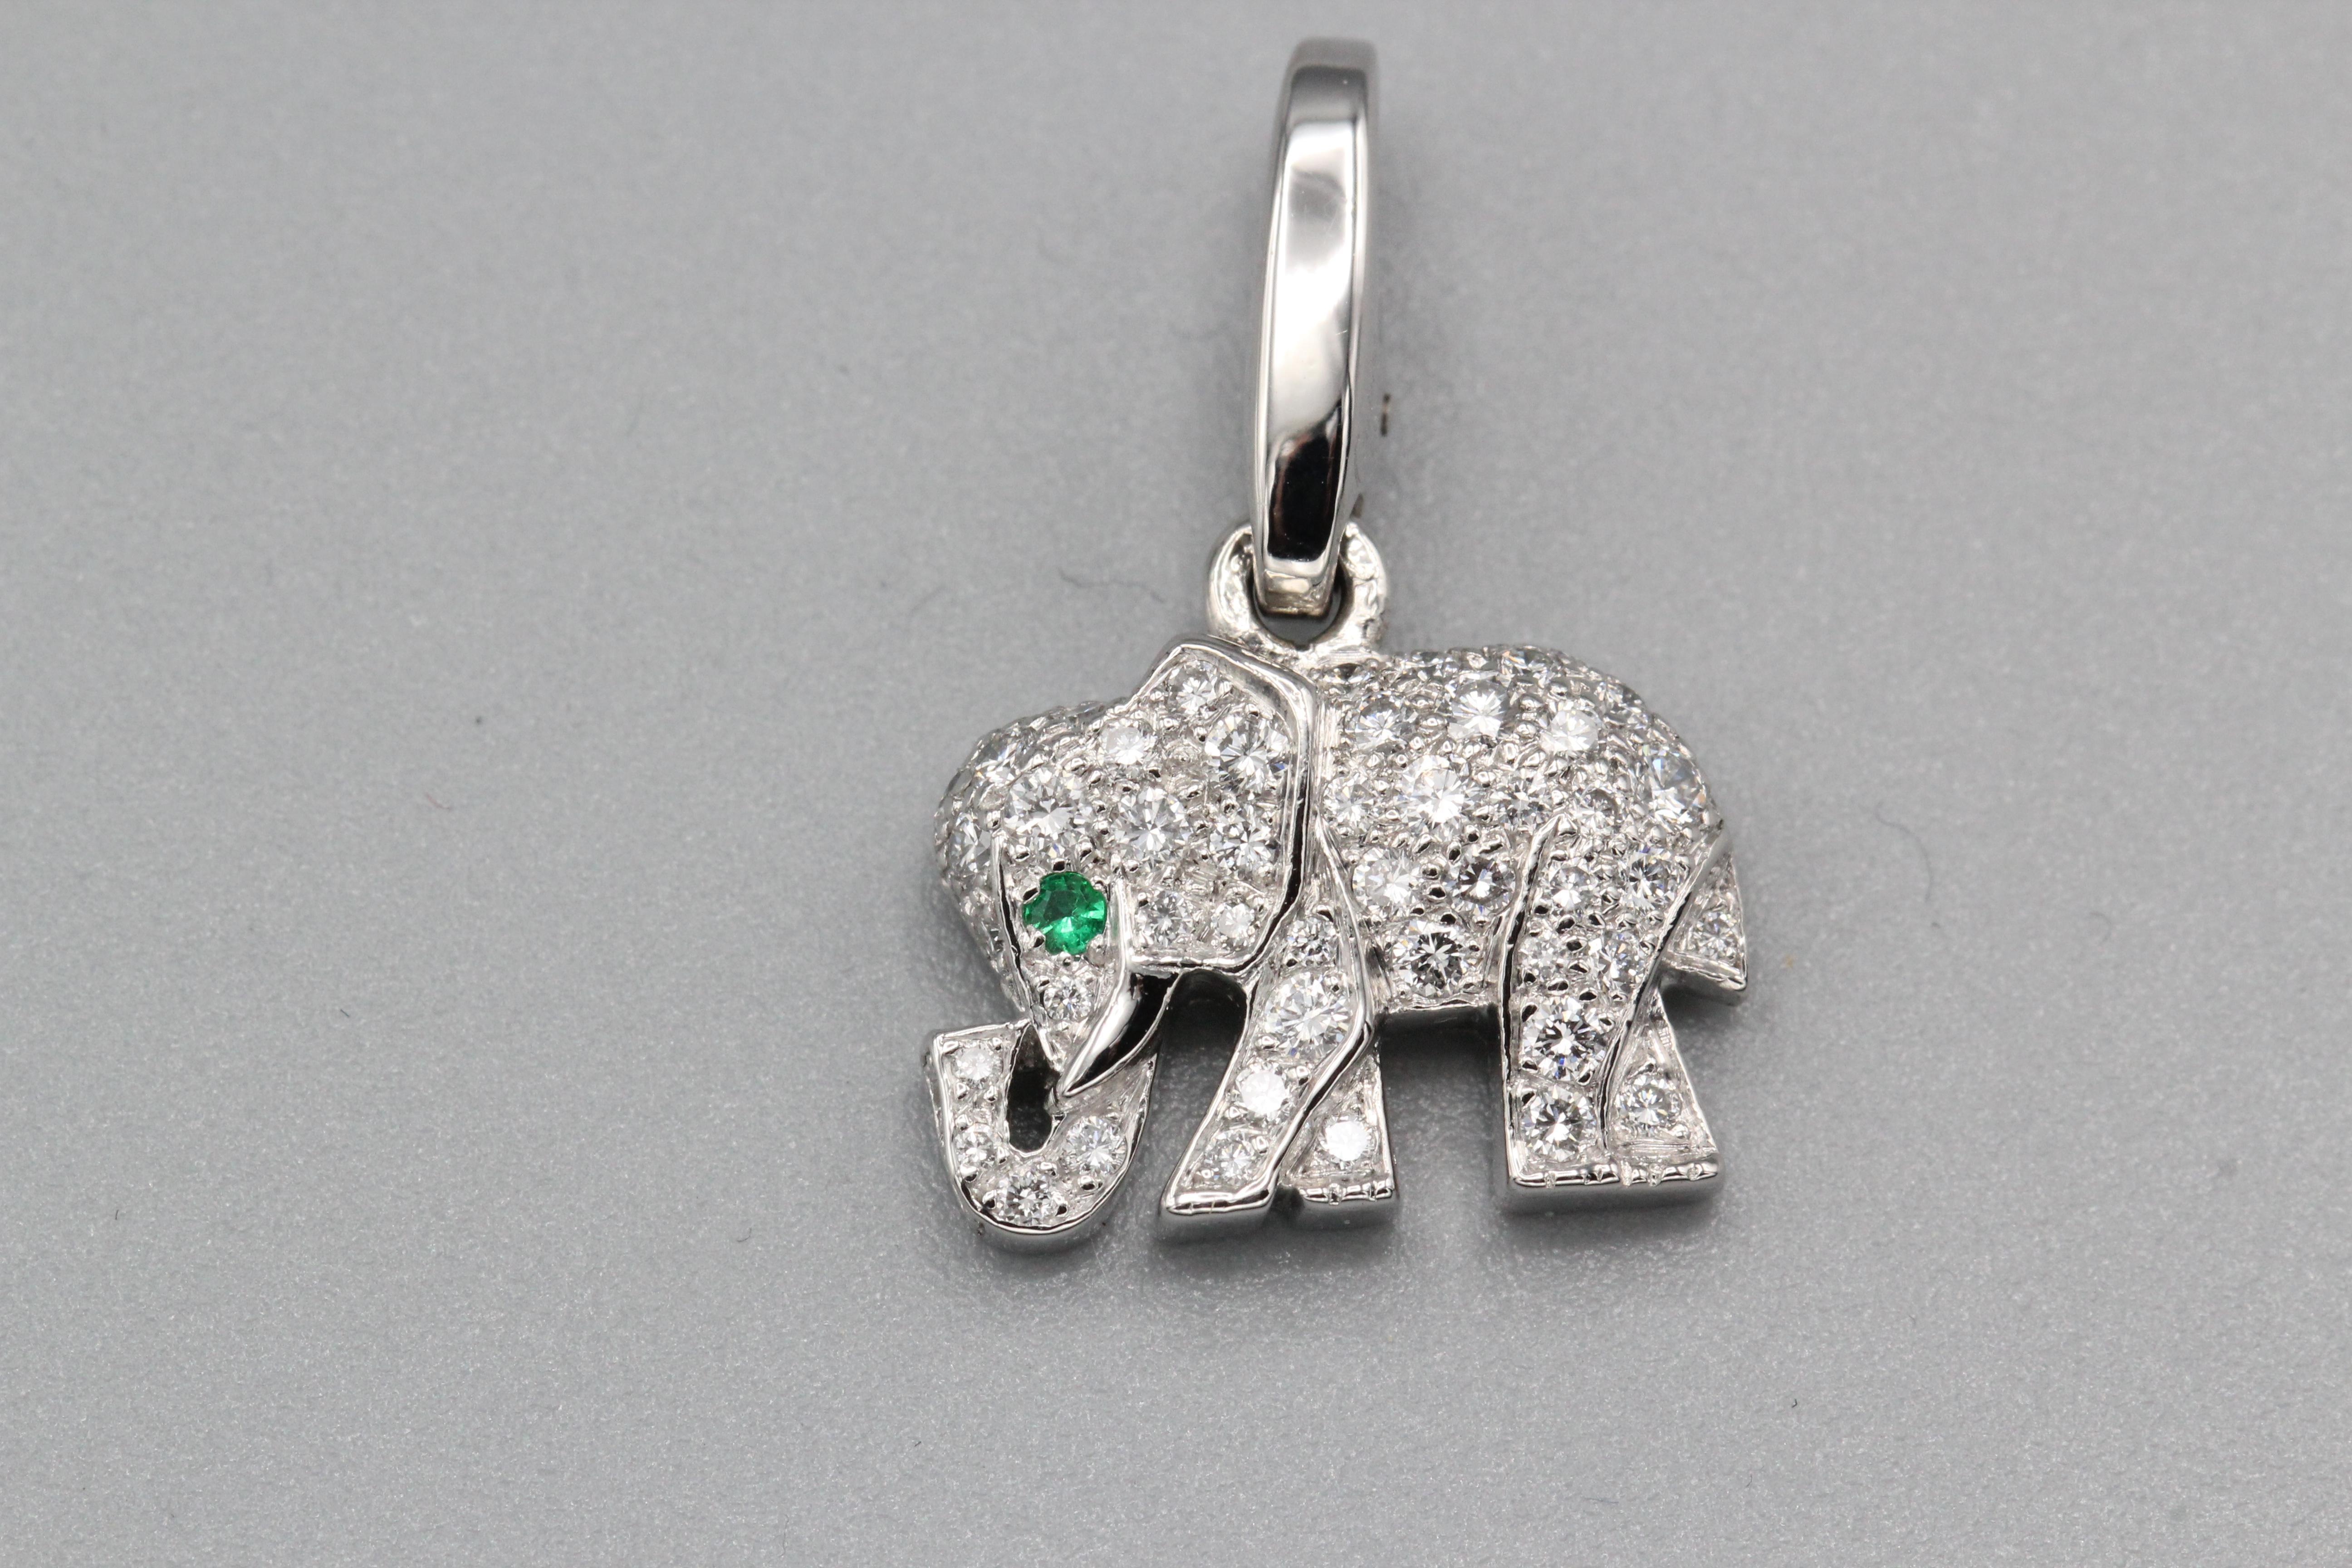 Evoke the majesty of the animal kingdom and the allure of fine jewelry with the Cartier Diamond Emerald 18 Karat White Gold Elephant Charm. This enchanting charm showcases the legendary craftsmanship of Cartier, marrying precious materials,